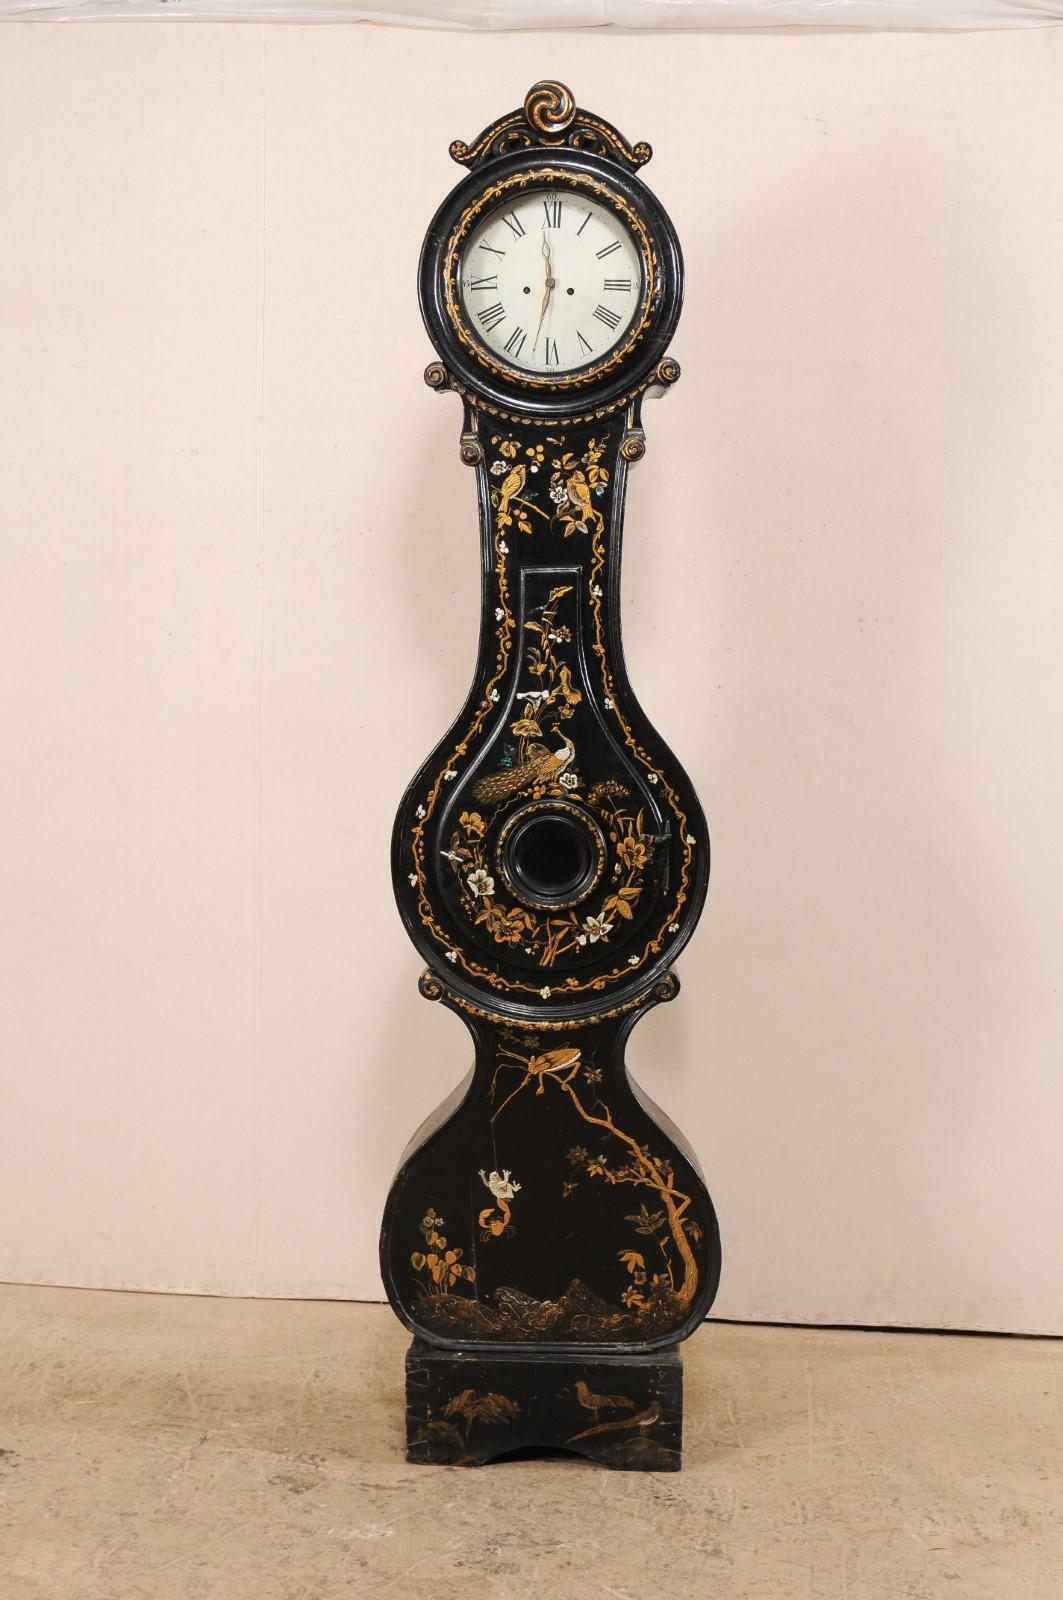 An elegant 19th century Swedish Fryksdahl clock adorn with distinctive chinoiserie nature design and abalone inlay. This antique Fryksdahl clock from Sweden is loaded with decorative chinoiserie throughout, in a playful nature motif of peacocks,